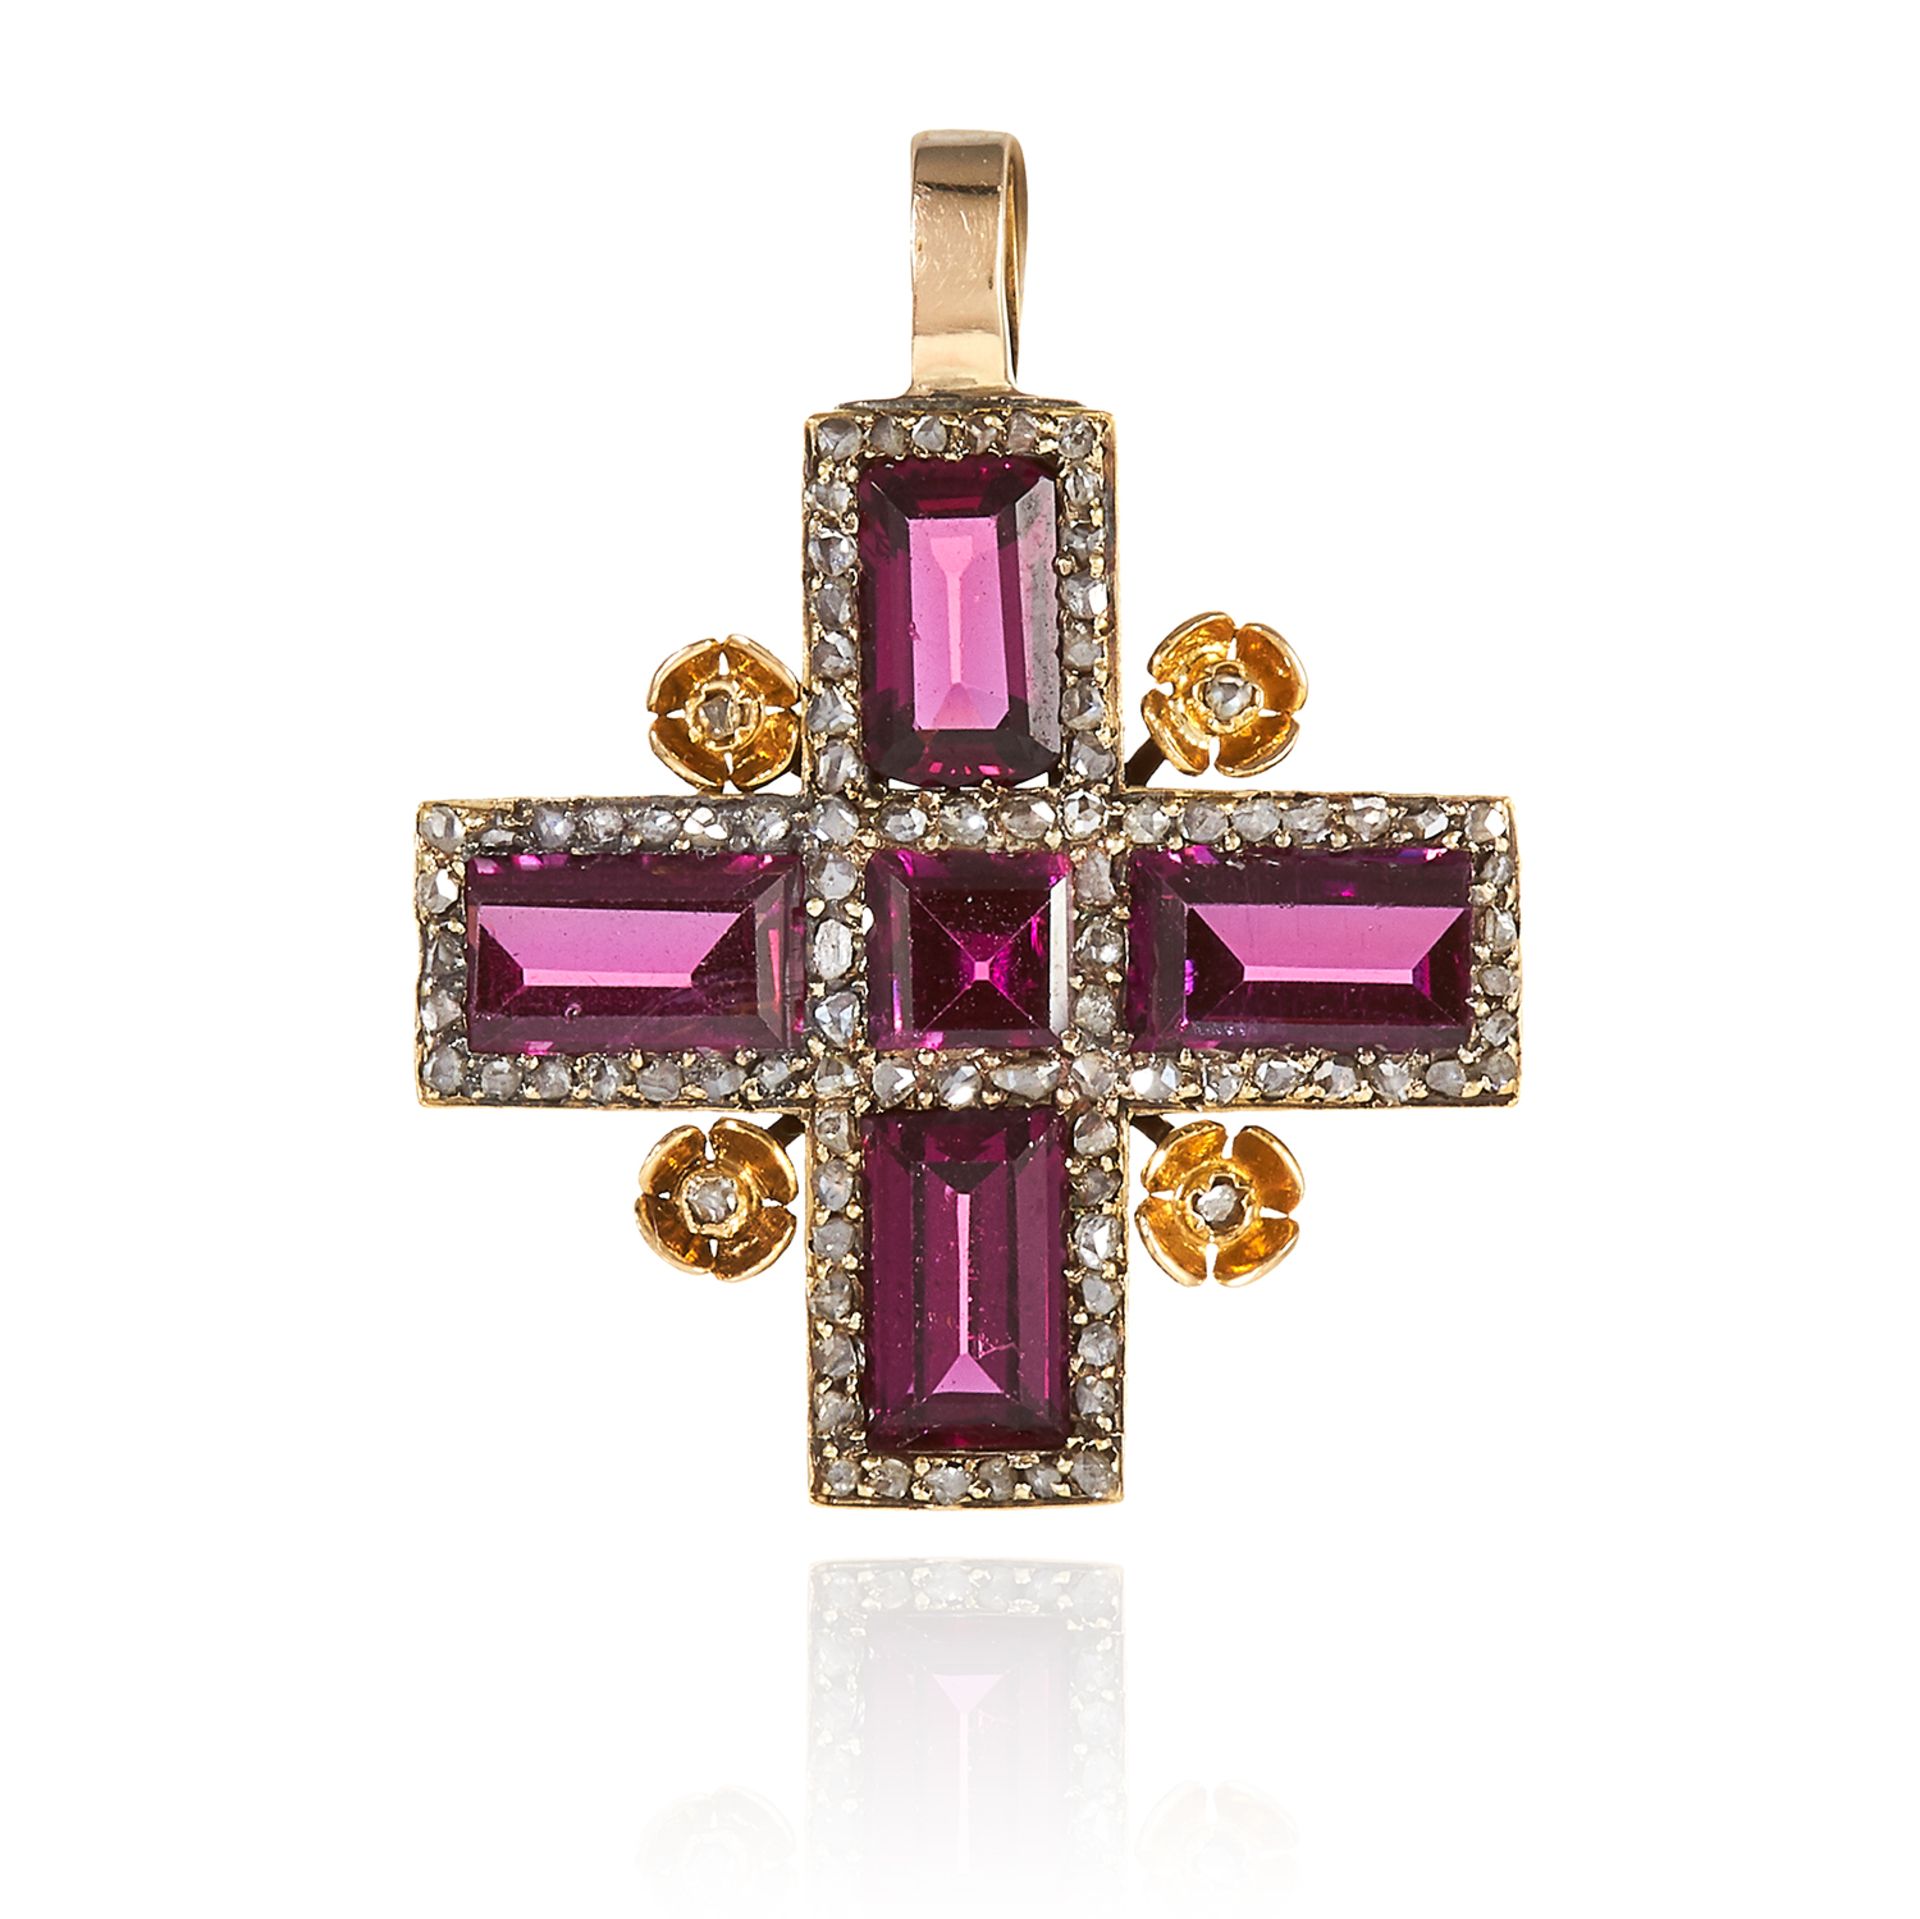 AN ANTIQUE TOURMALINE AND DIAMOND CROSS PENDANT in yellow gold, set with five emerald cut